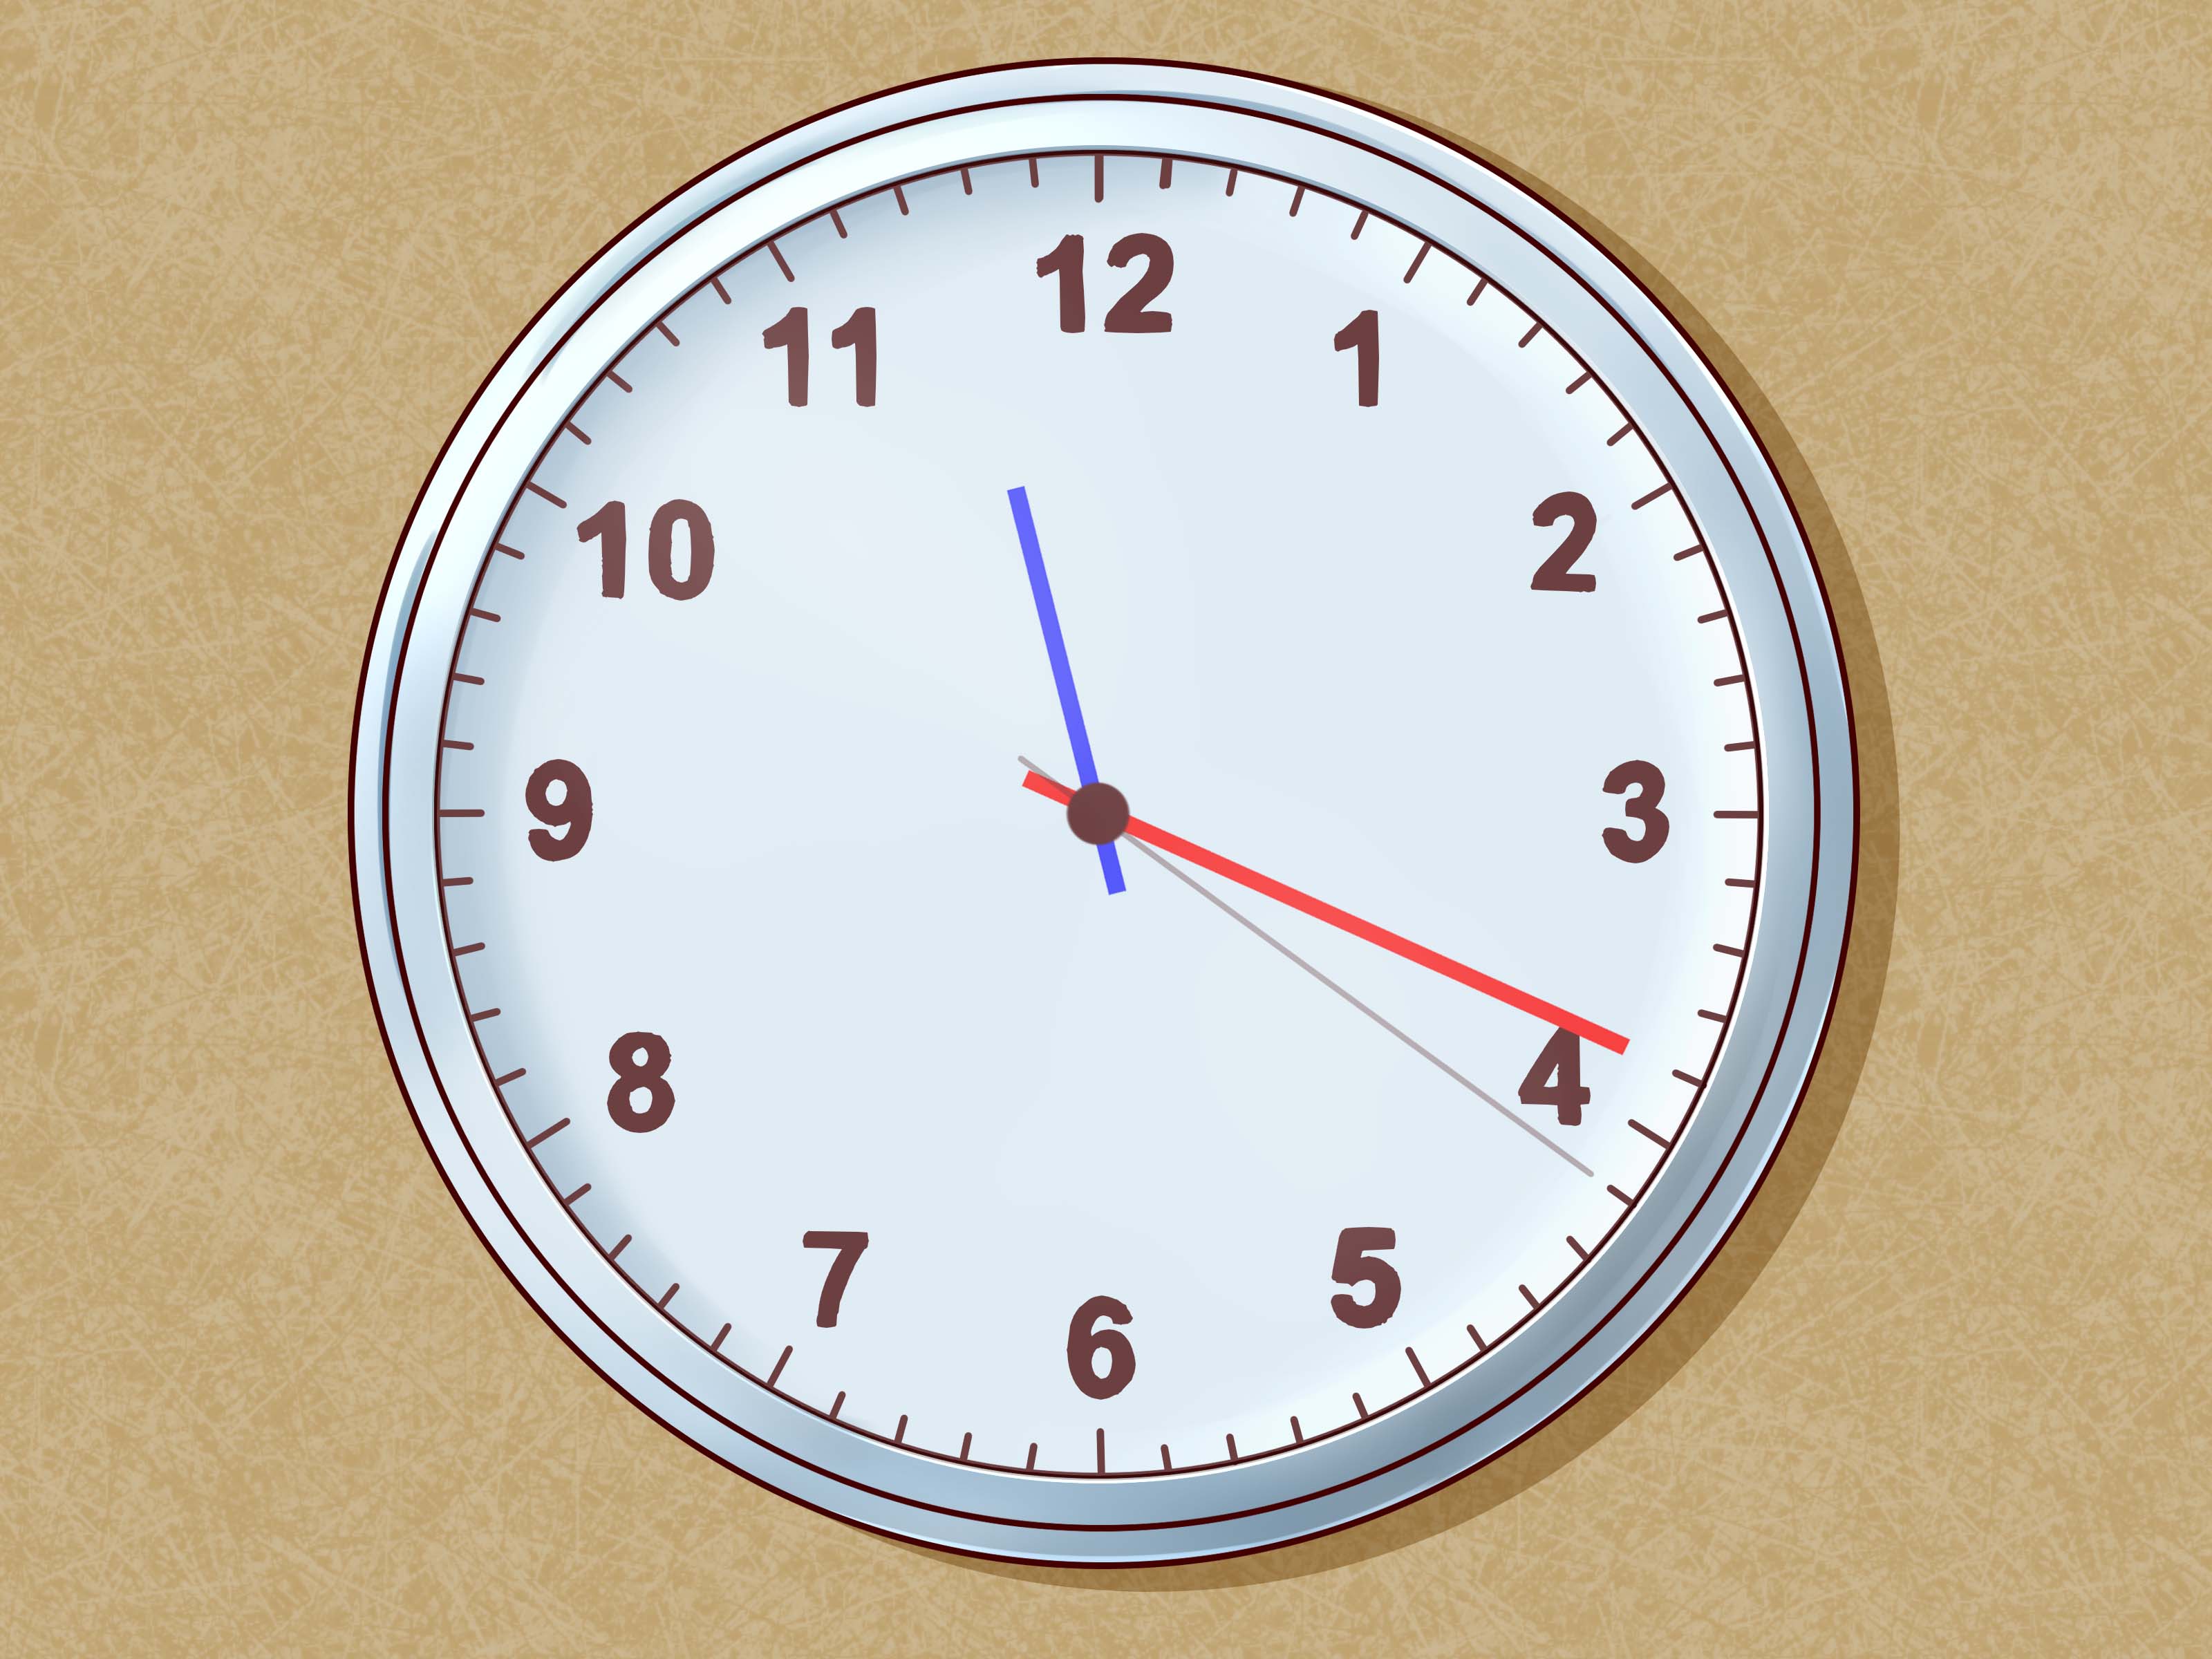 How to Tell Time: 15 Steps (with Pictures) - wikiHow